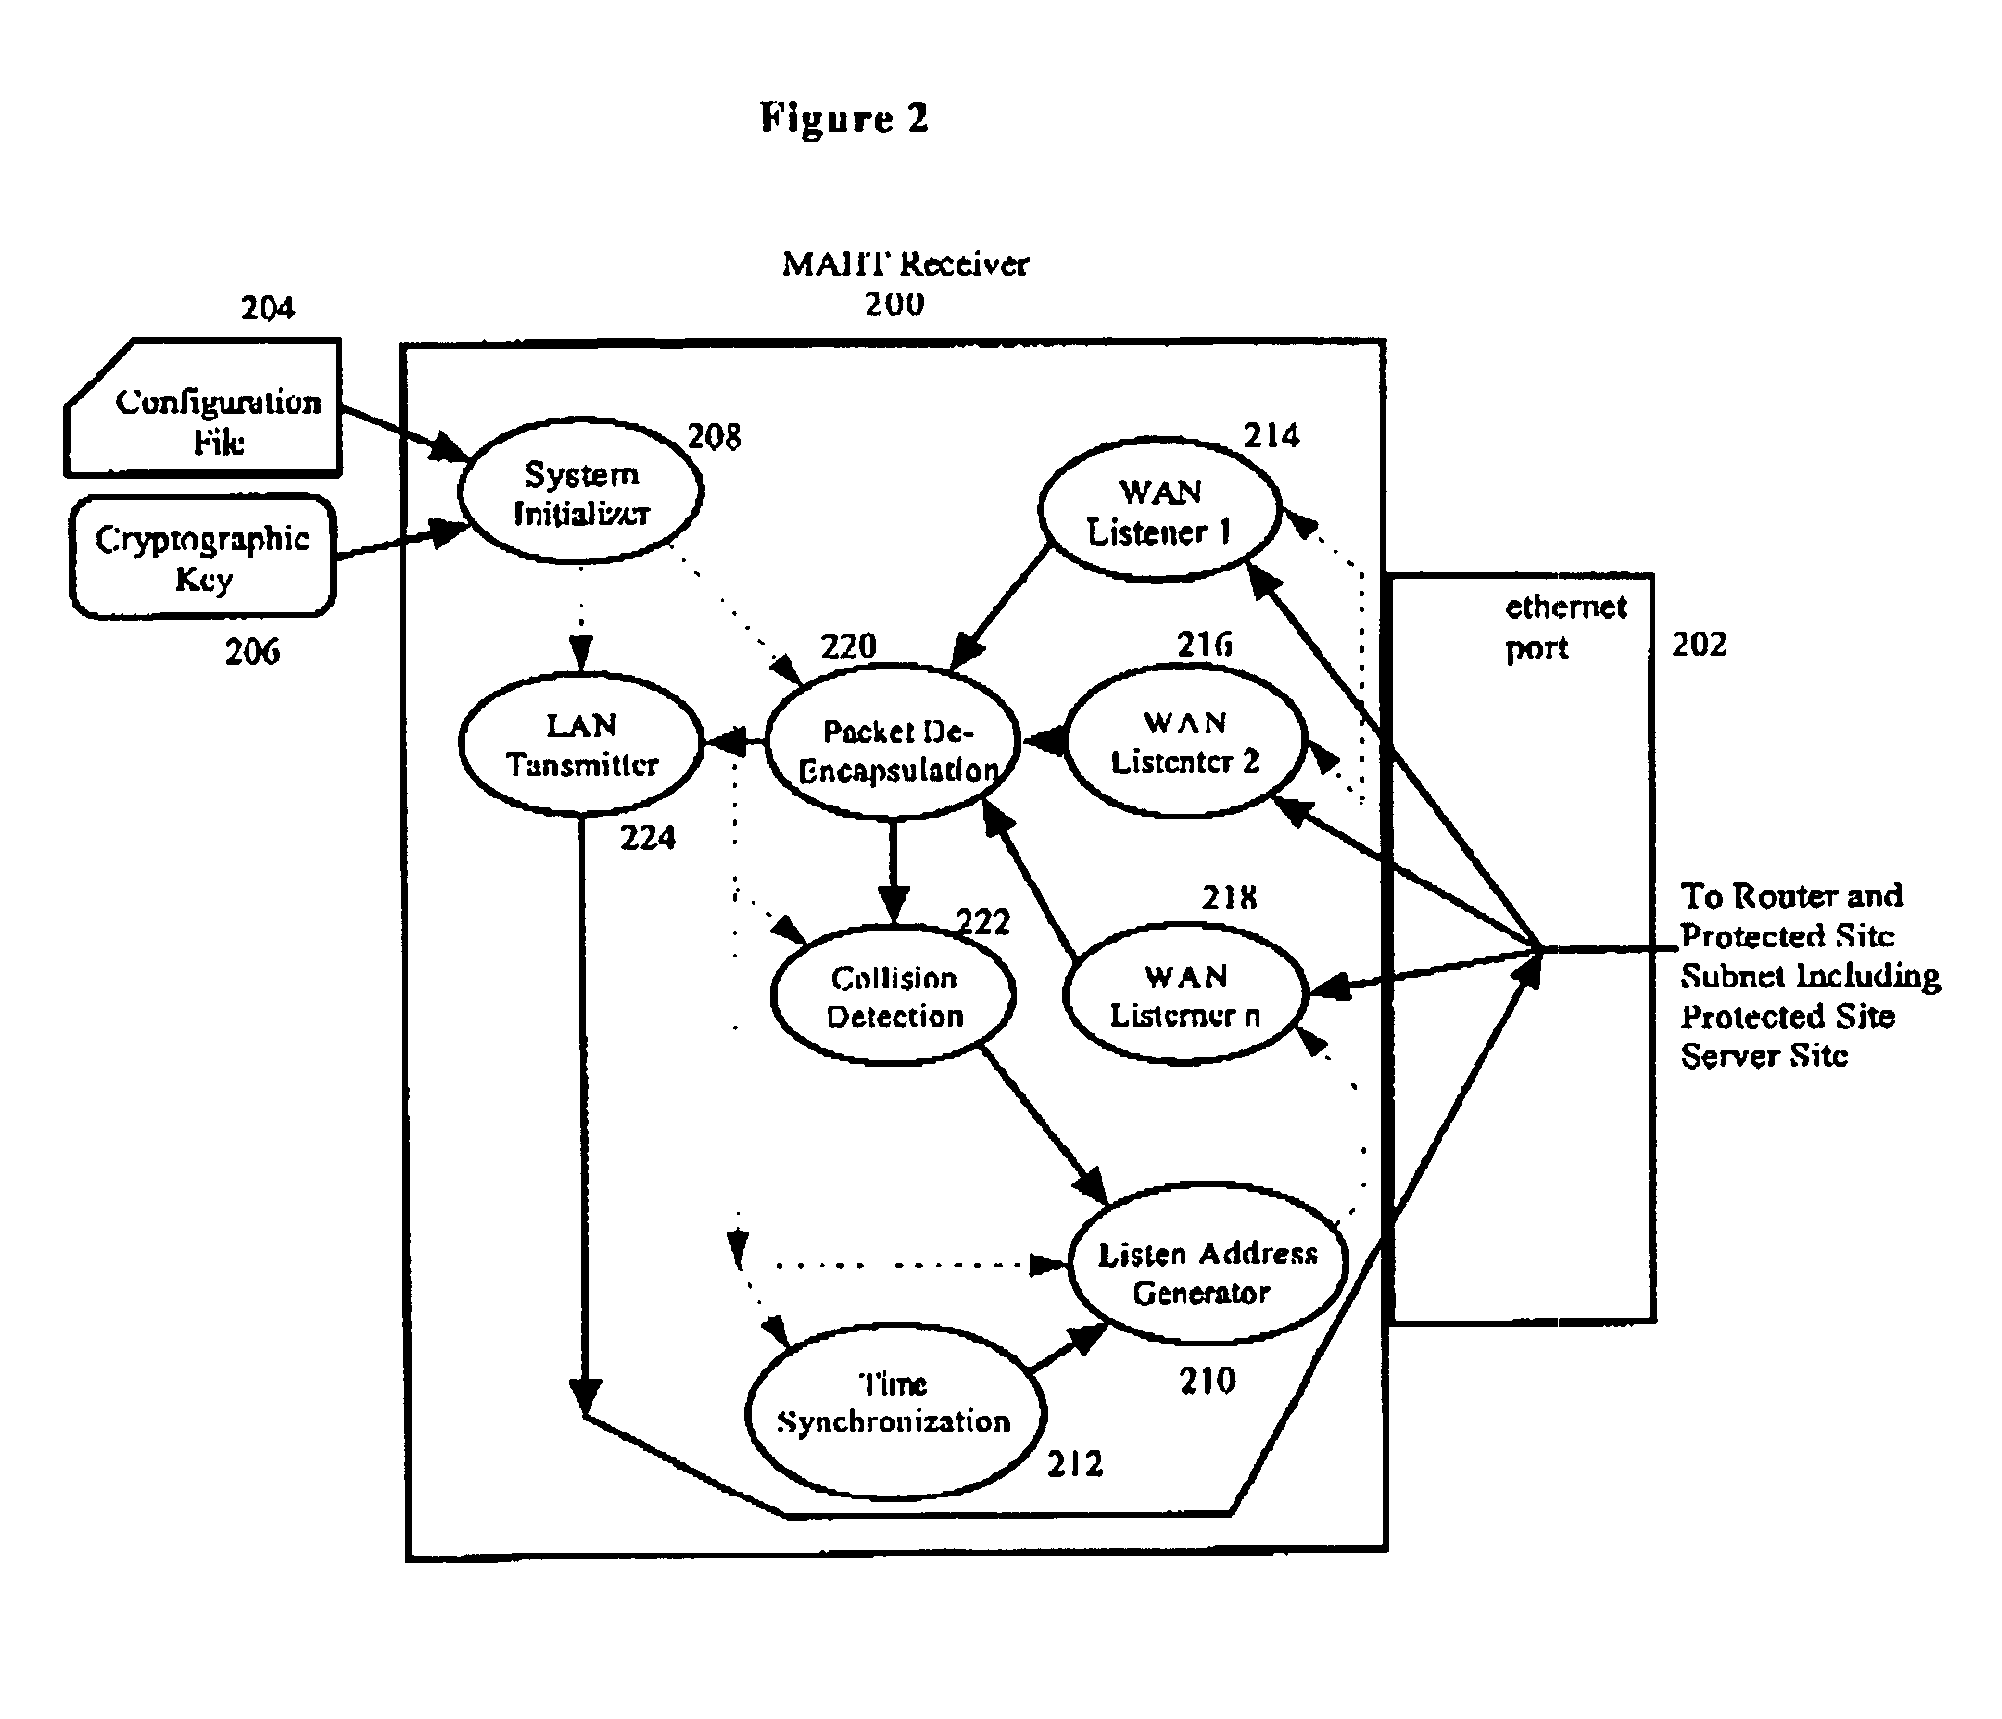 Method and system for protection of internet sites against denial of service attacks through use of an IP multicast address hopping technique